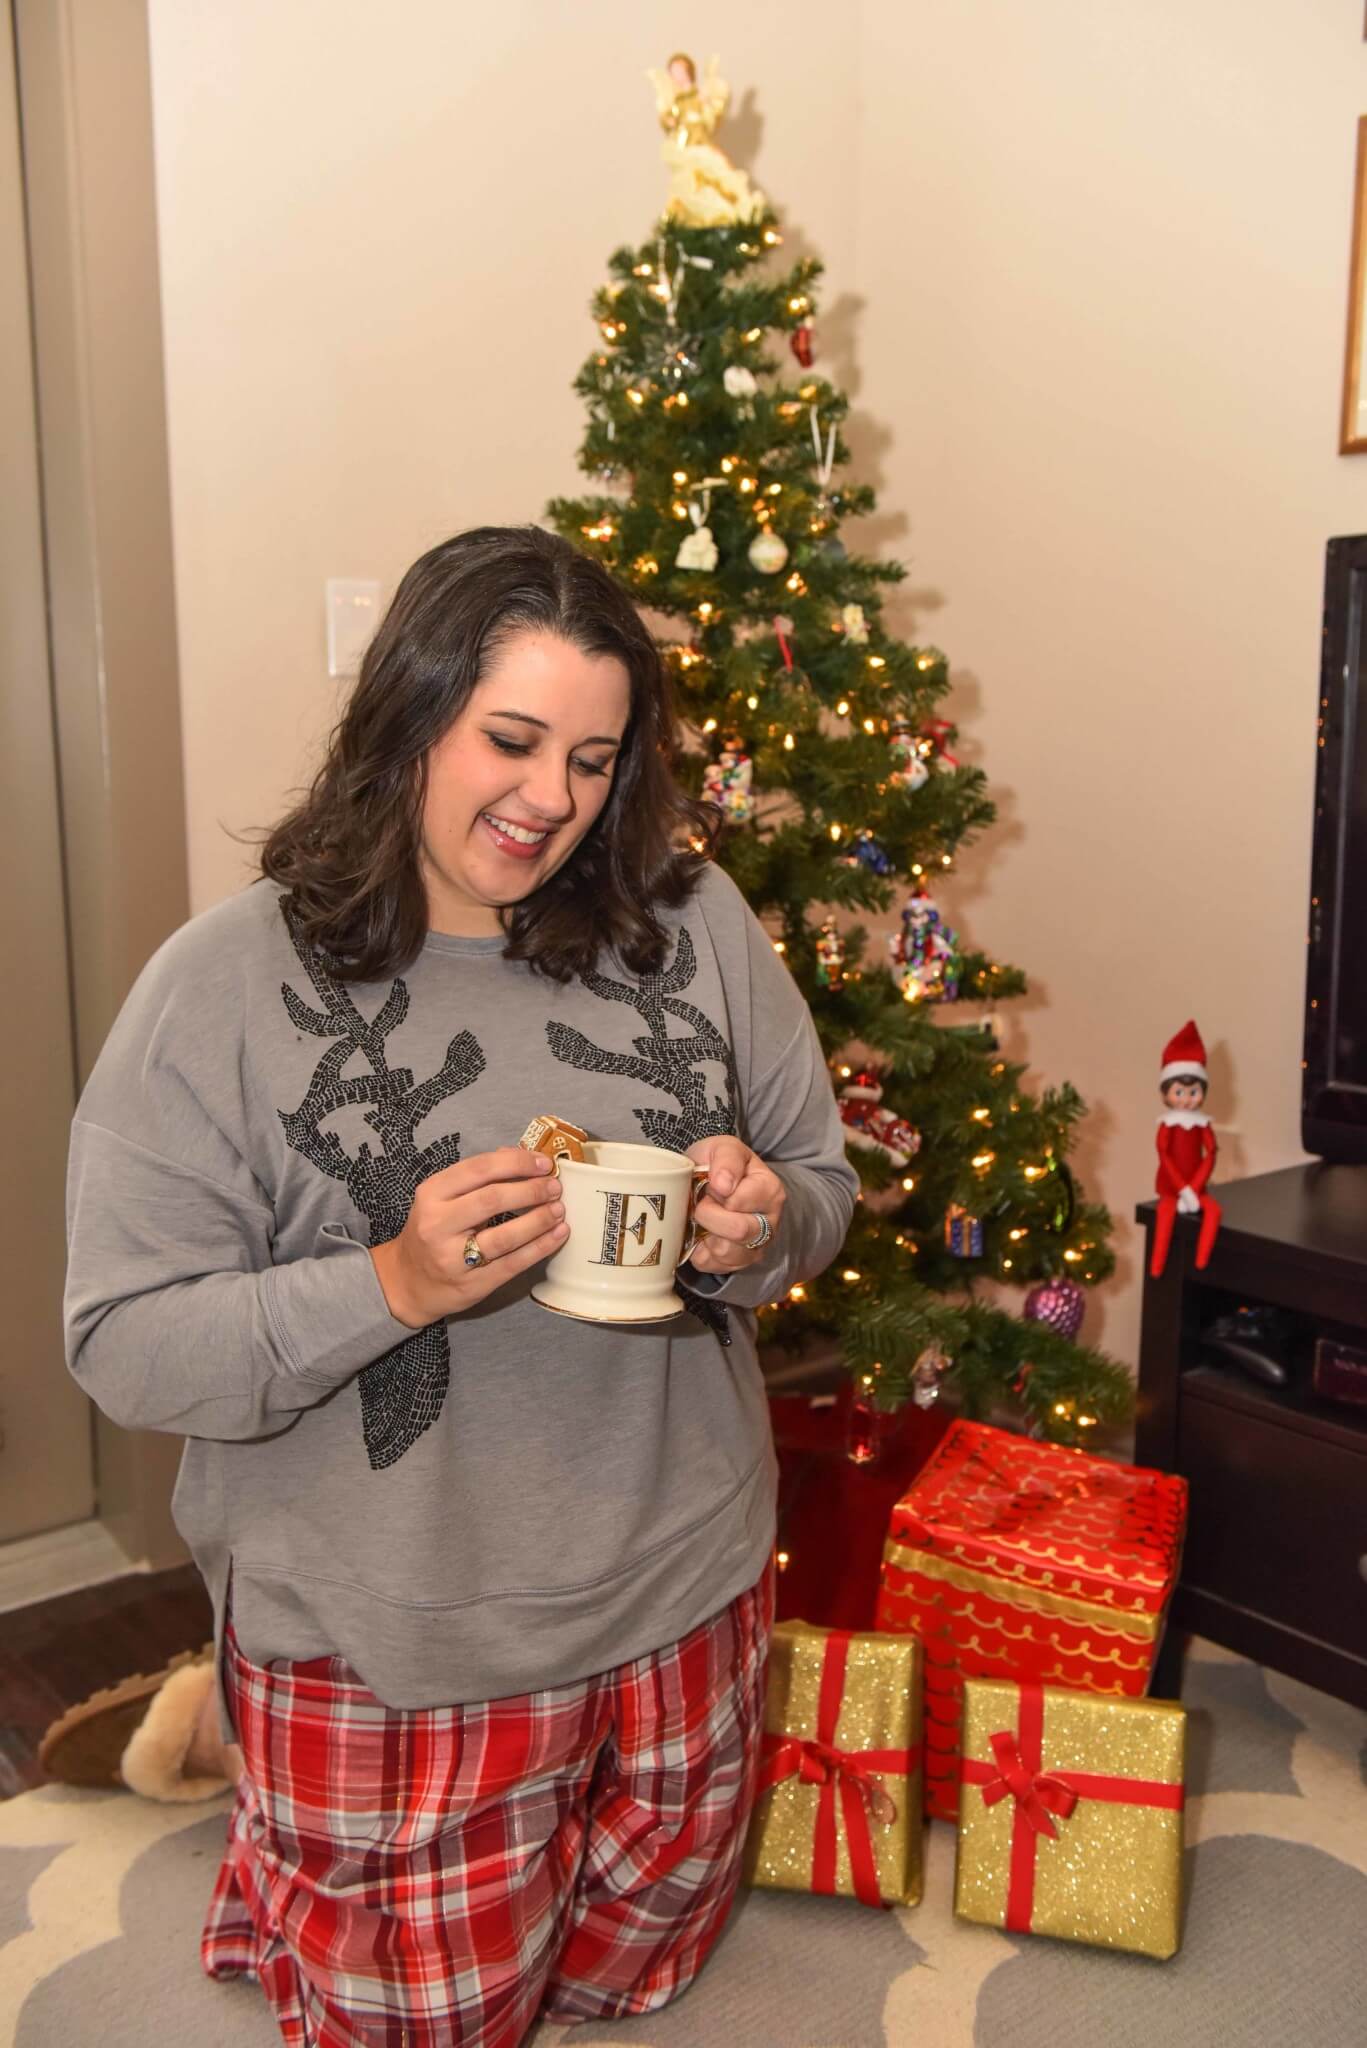 Nothing says Christmas morning quite like a mug of hot chocolate and a pair of cozy Christmas PJs. I'm sharing what to wear on Christmas morning to be comfortable and stylish while opening presents with family and friends. This cozy holiday post was written by plus size style blogger, Emily Bastedo of the blog Something Gold, Something Blue - @EmilySGSB